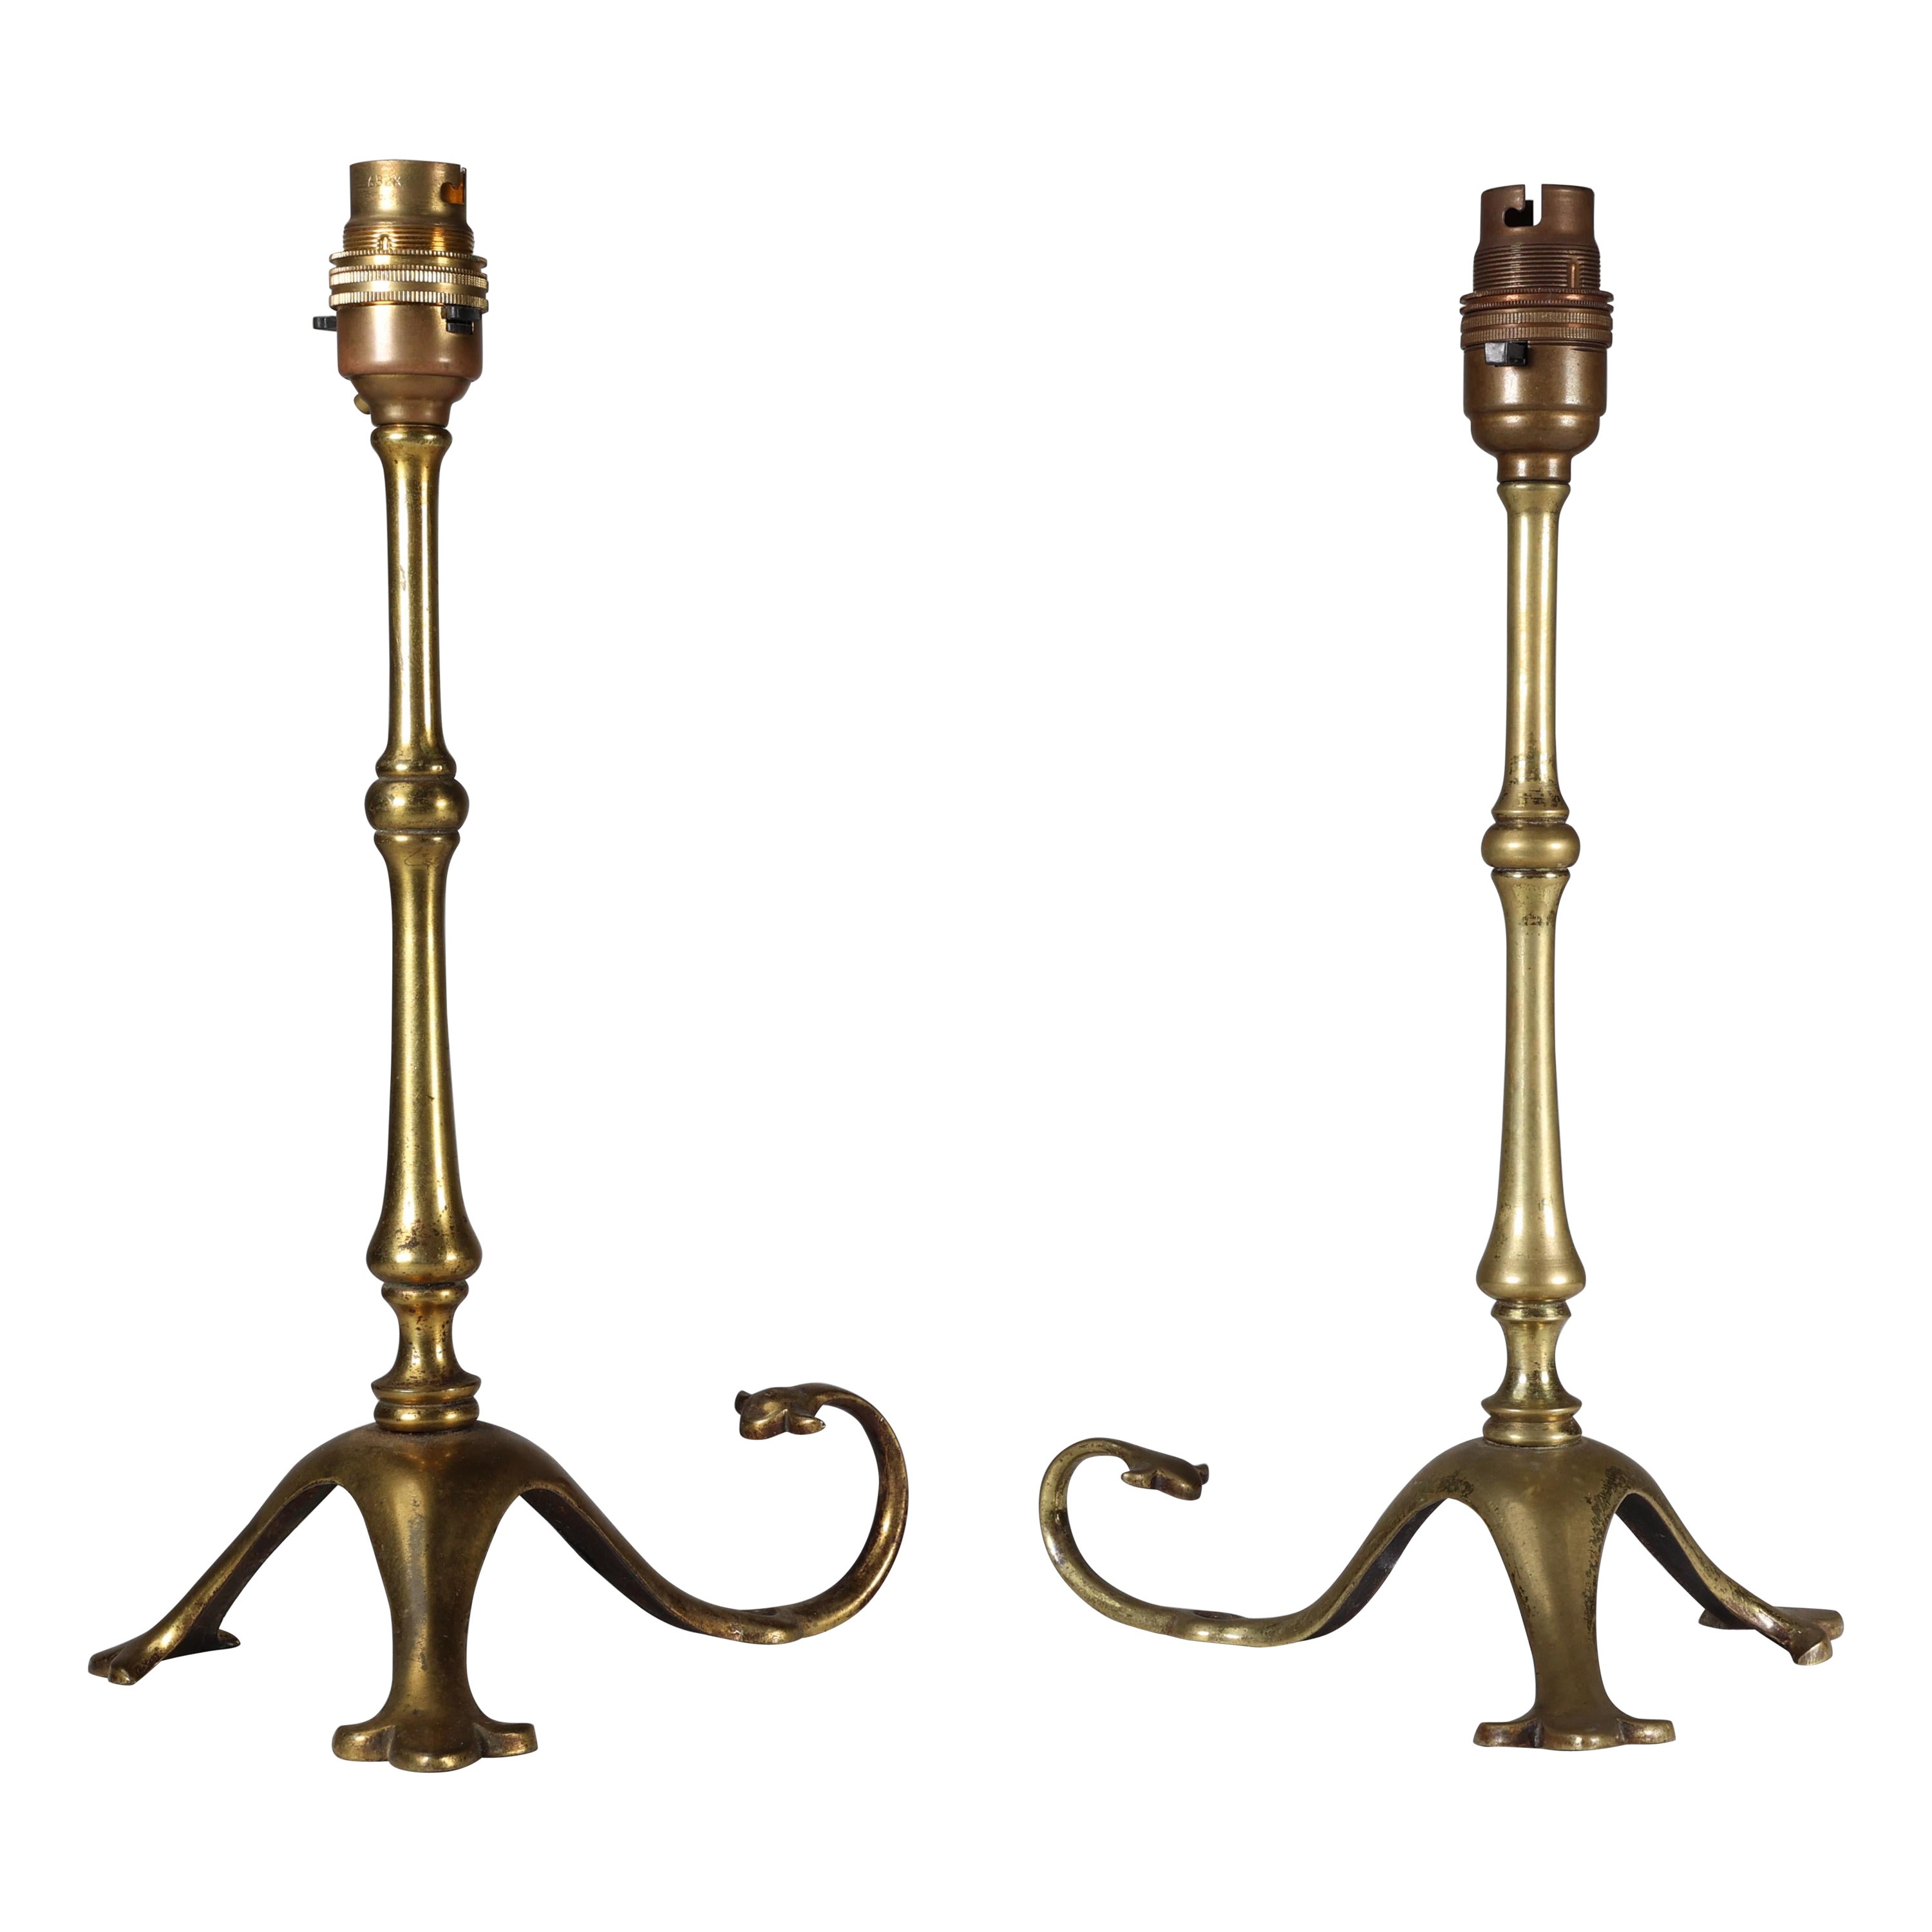 WAS Benson. A pair of Arts & Crafts brass table lamps with a serpent style tails